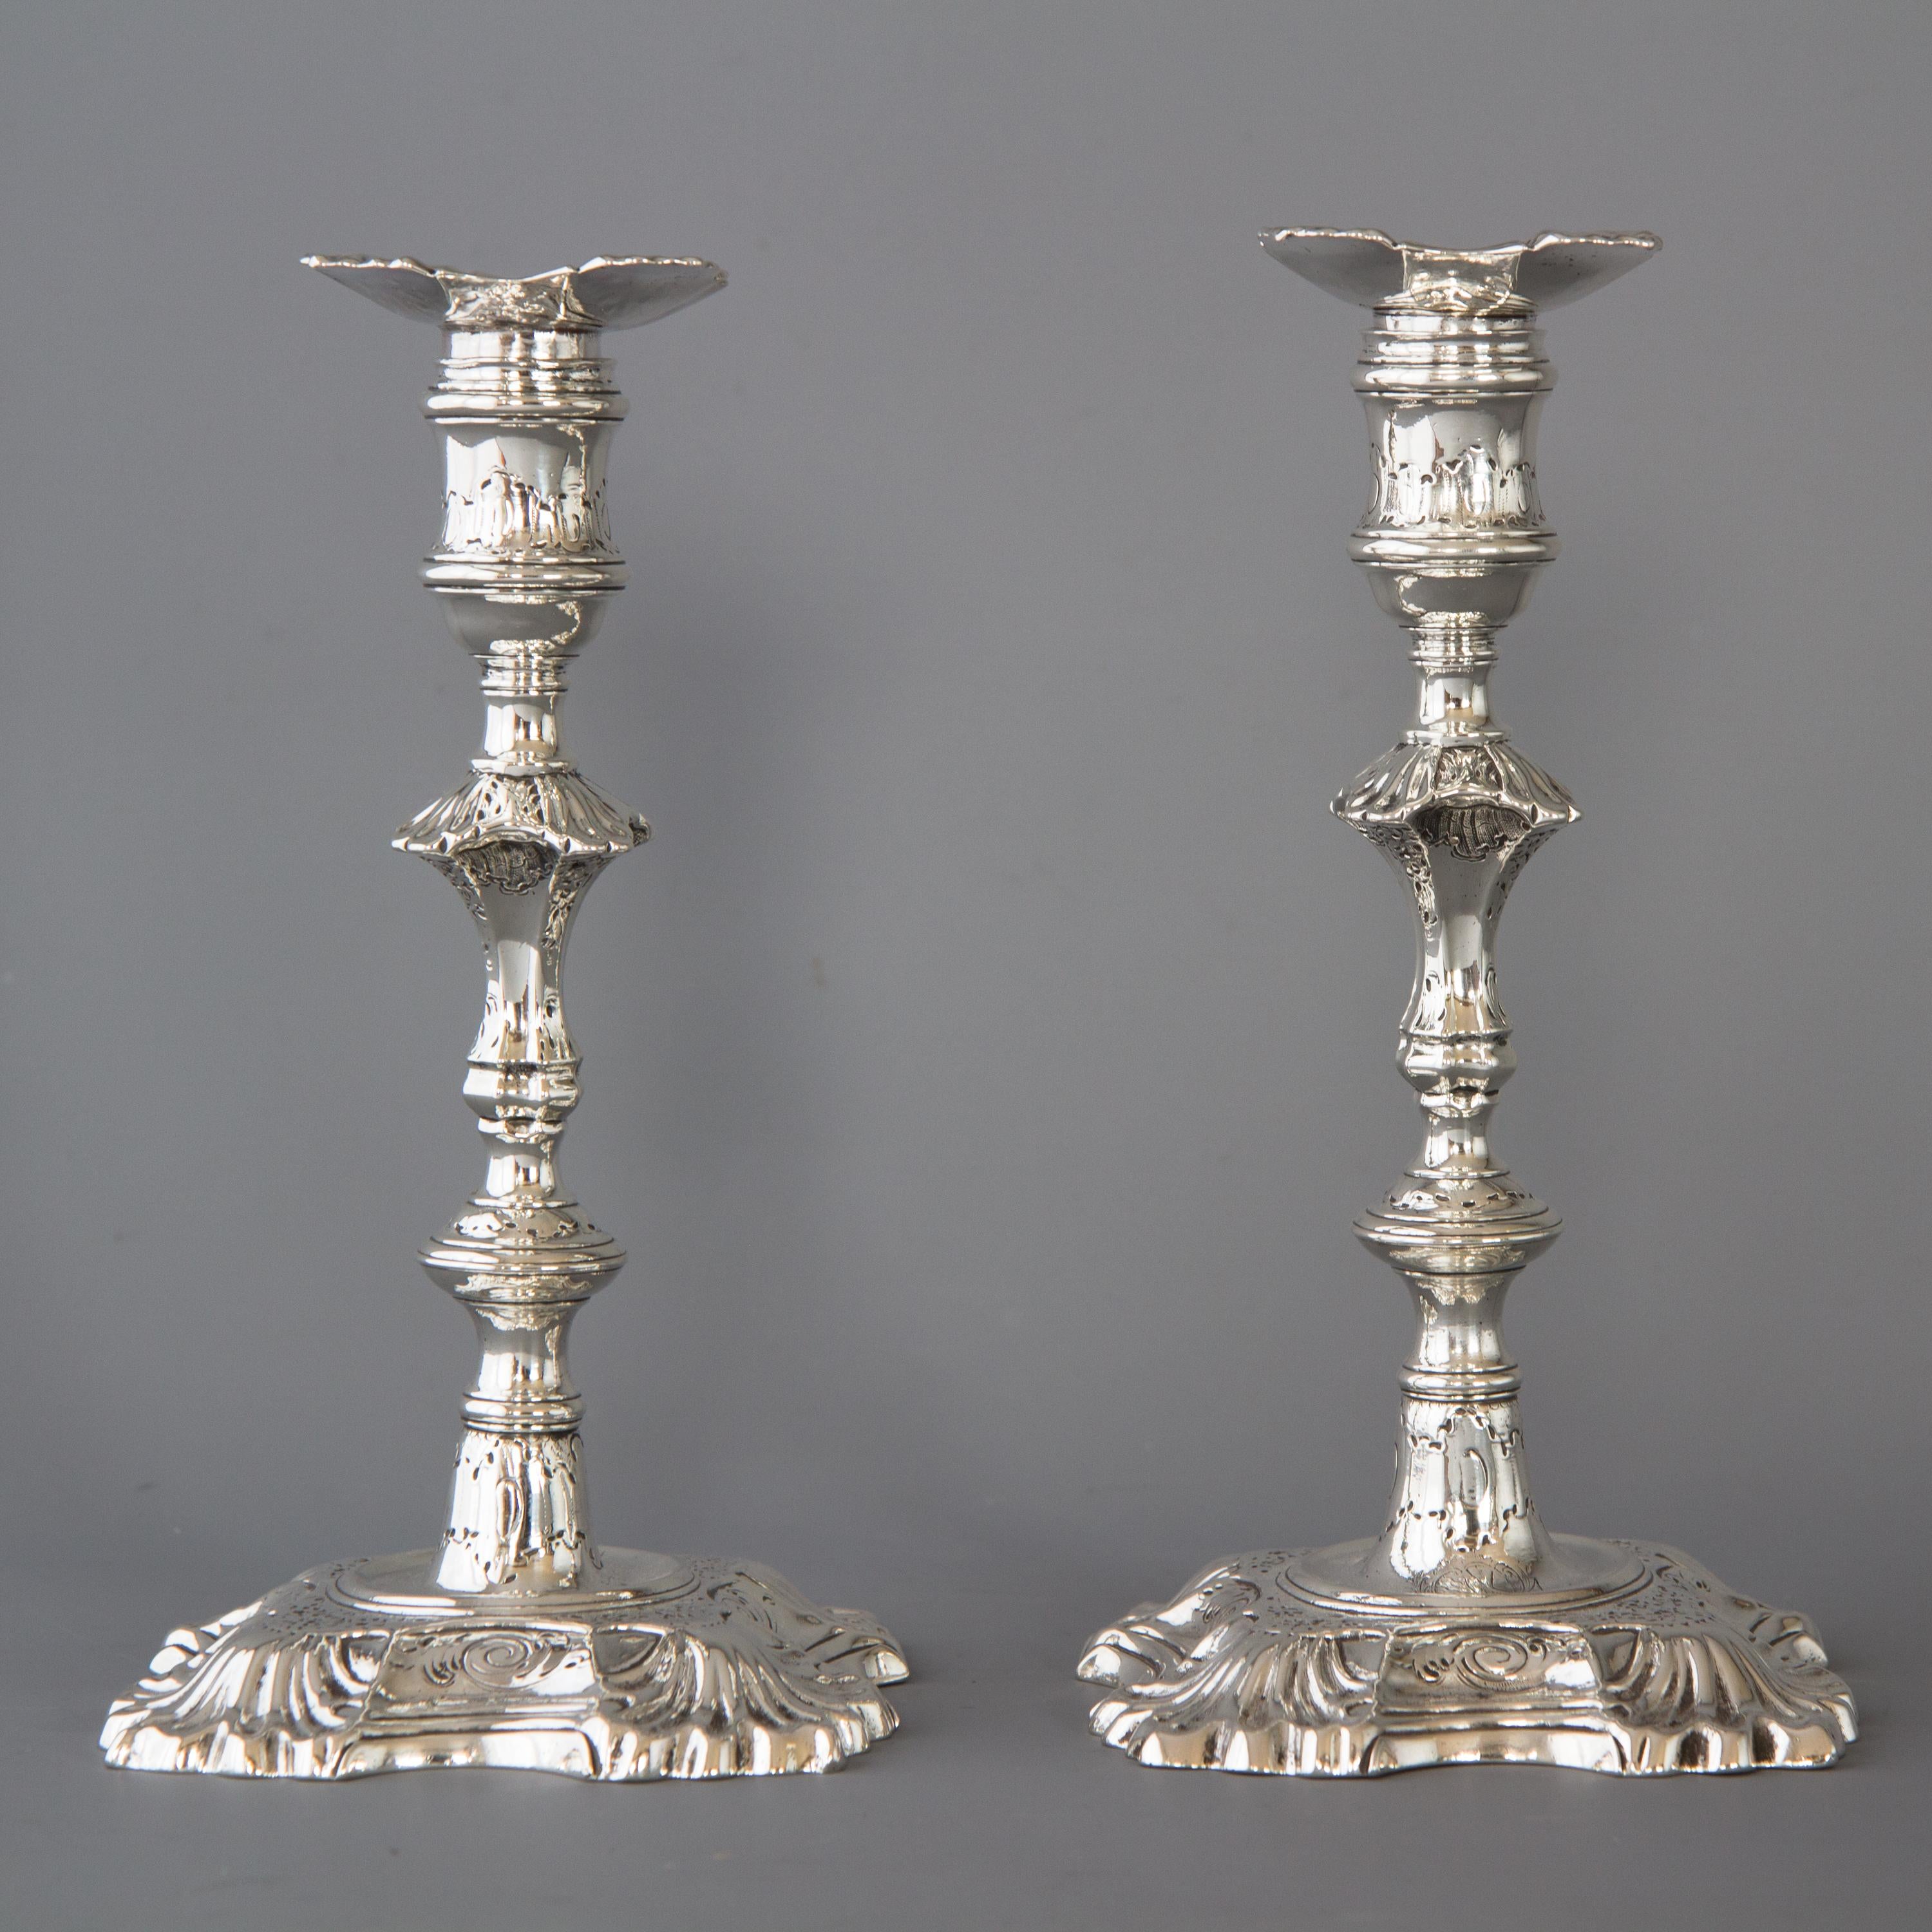 A superb pair of cast George II silver candlesticks by John Cafe, London 1749. With square bases shaped and stepped with acanthus form corners. The fluted columns rising above a circular knop to a square knop with matching acanthus decoration to the